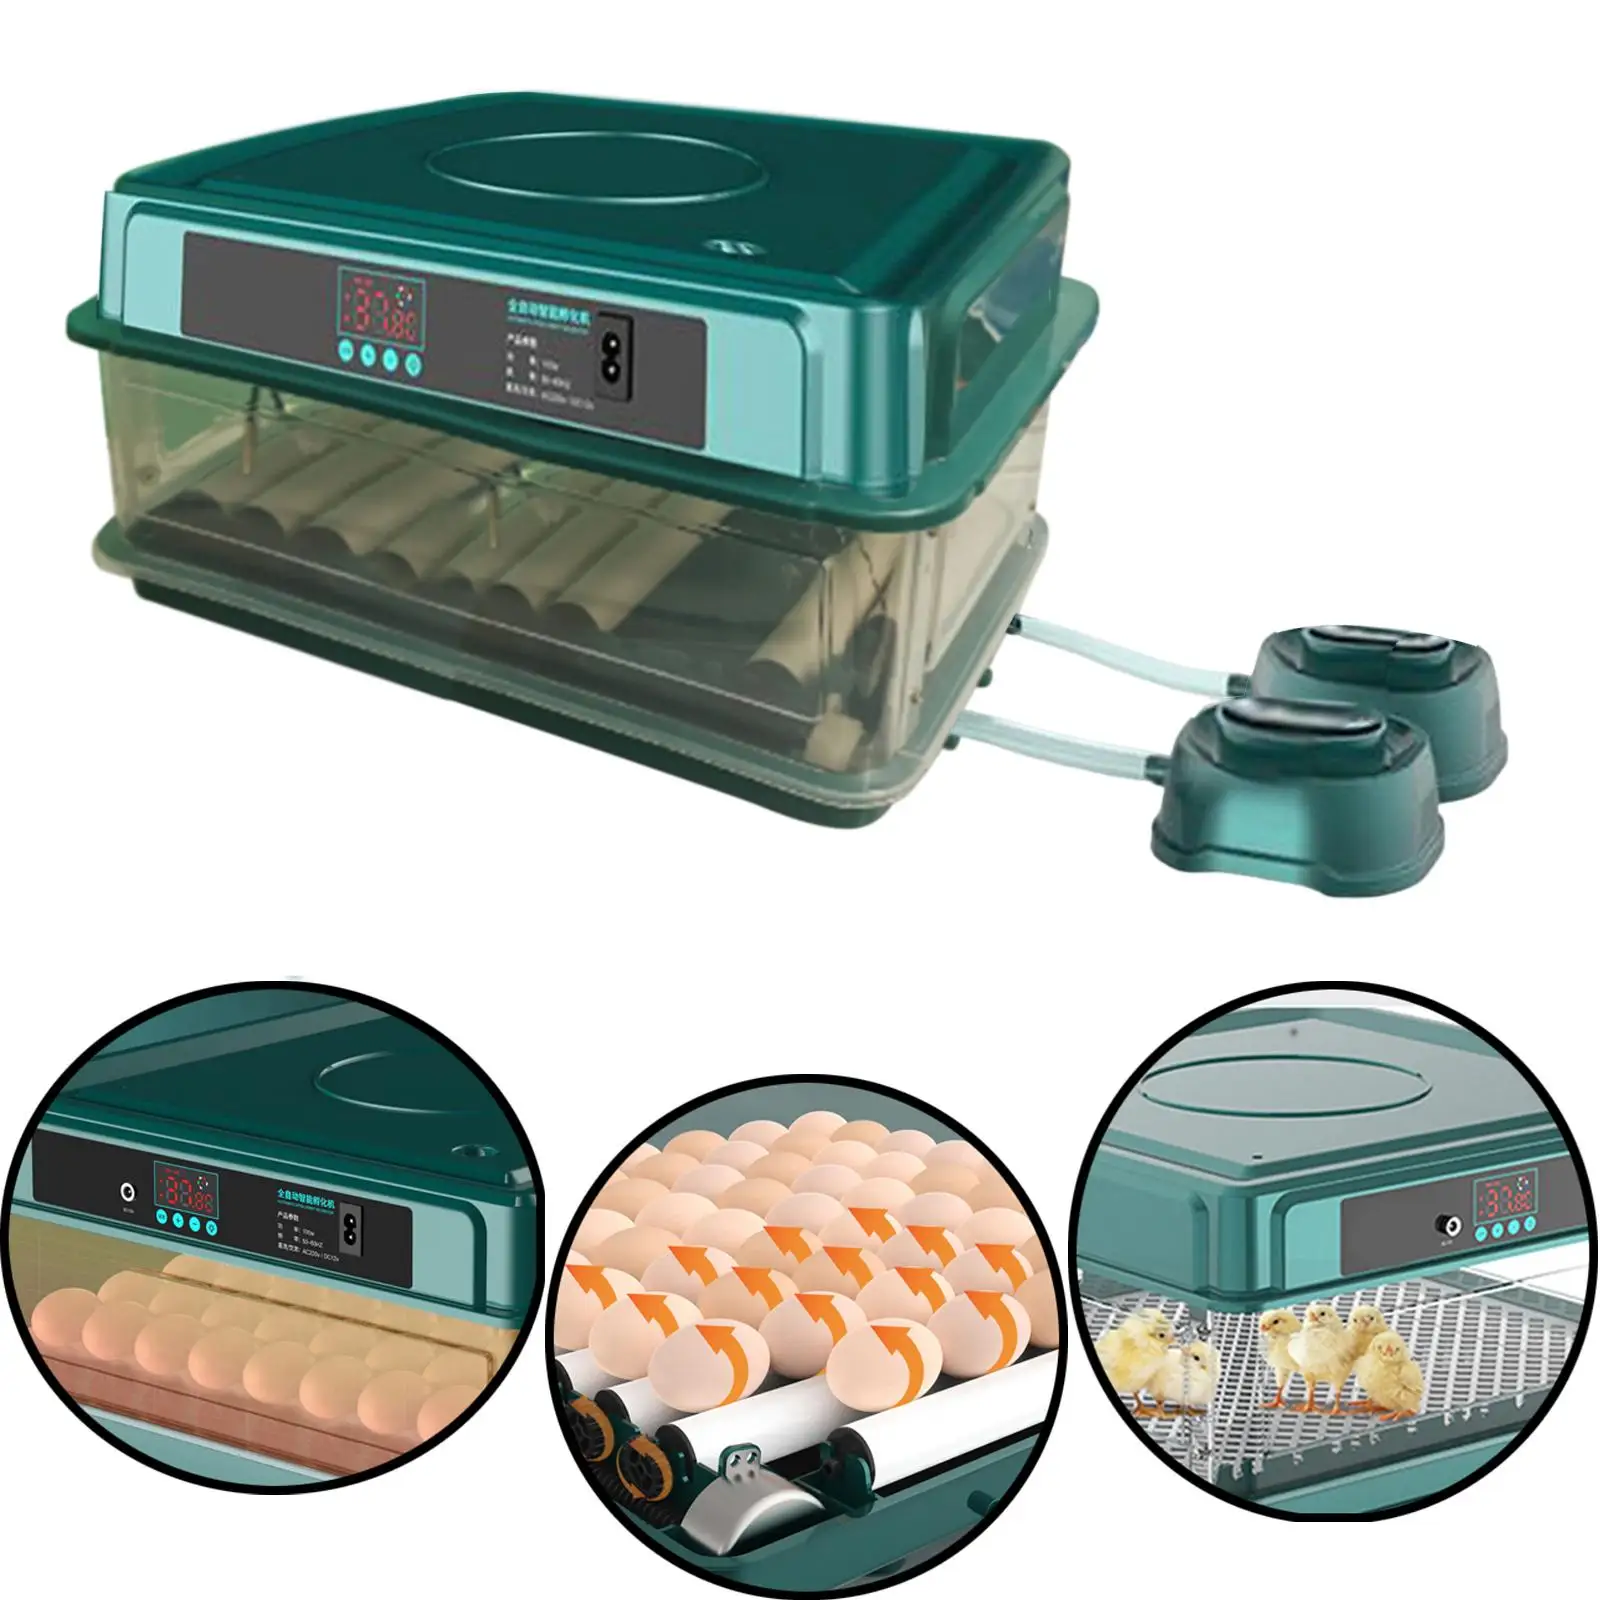 Digital Egg Incubator Poultry Brooder Desk Hold 64 Eggs Automatic Poultry Hatcher Hatching Machine Egg Turner for Quail Chicken